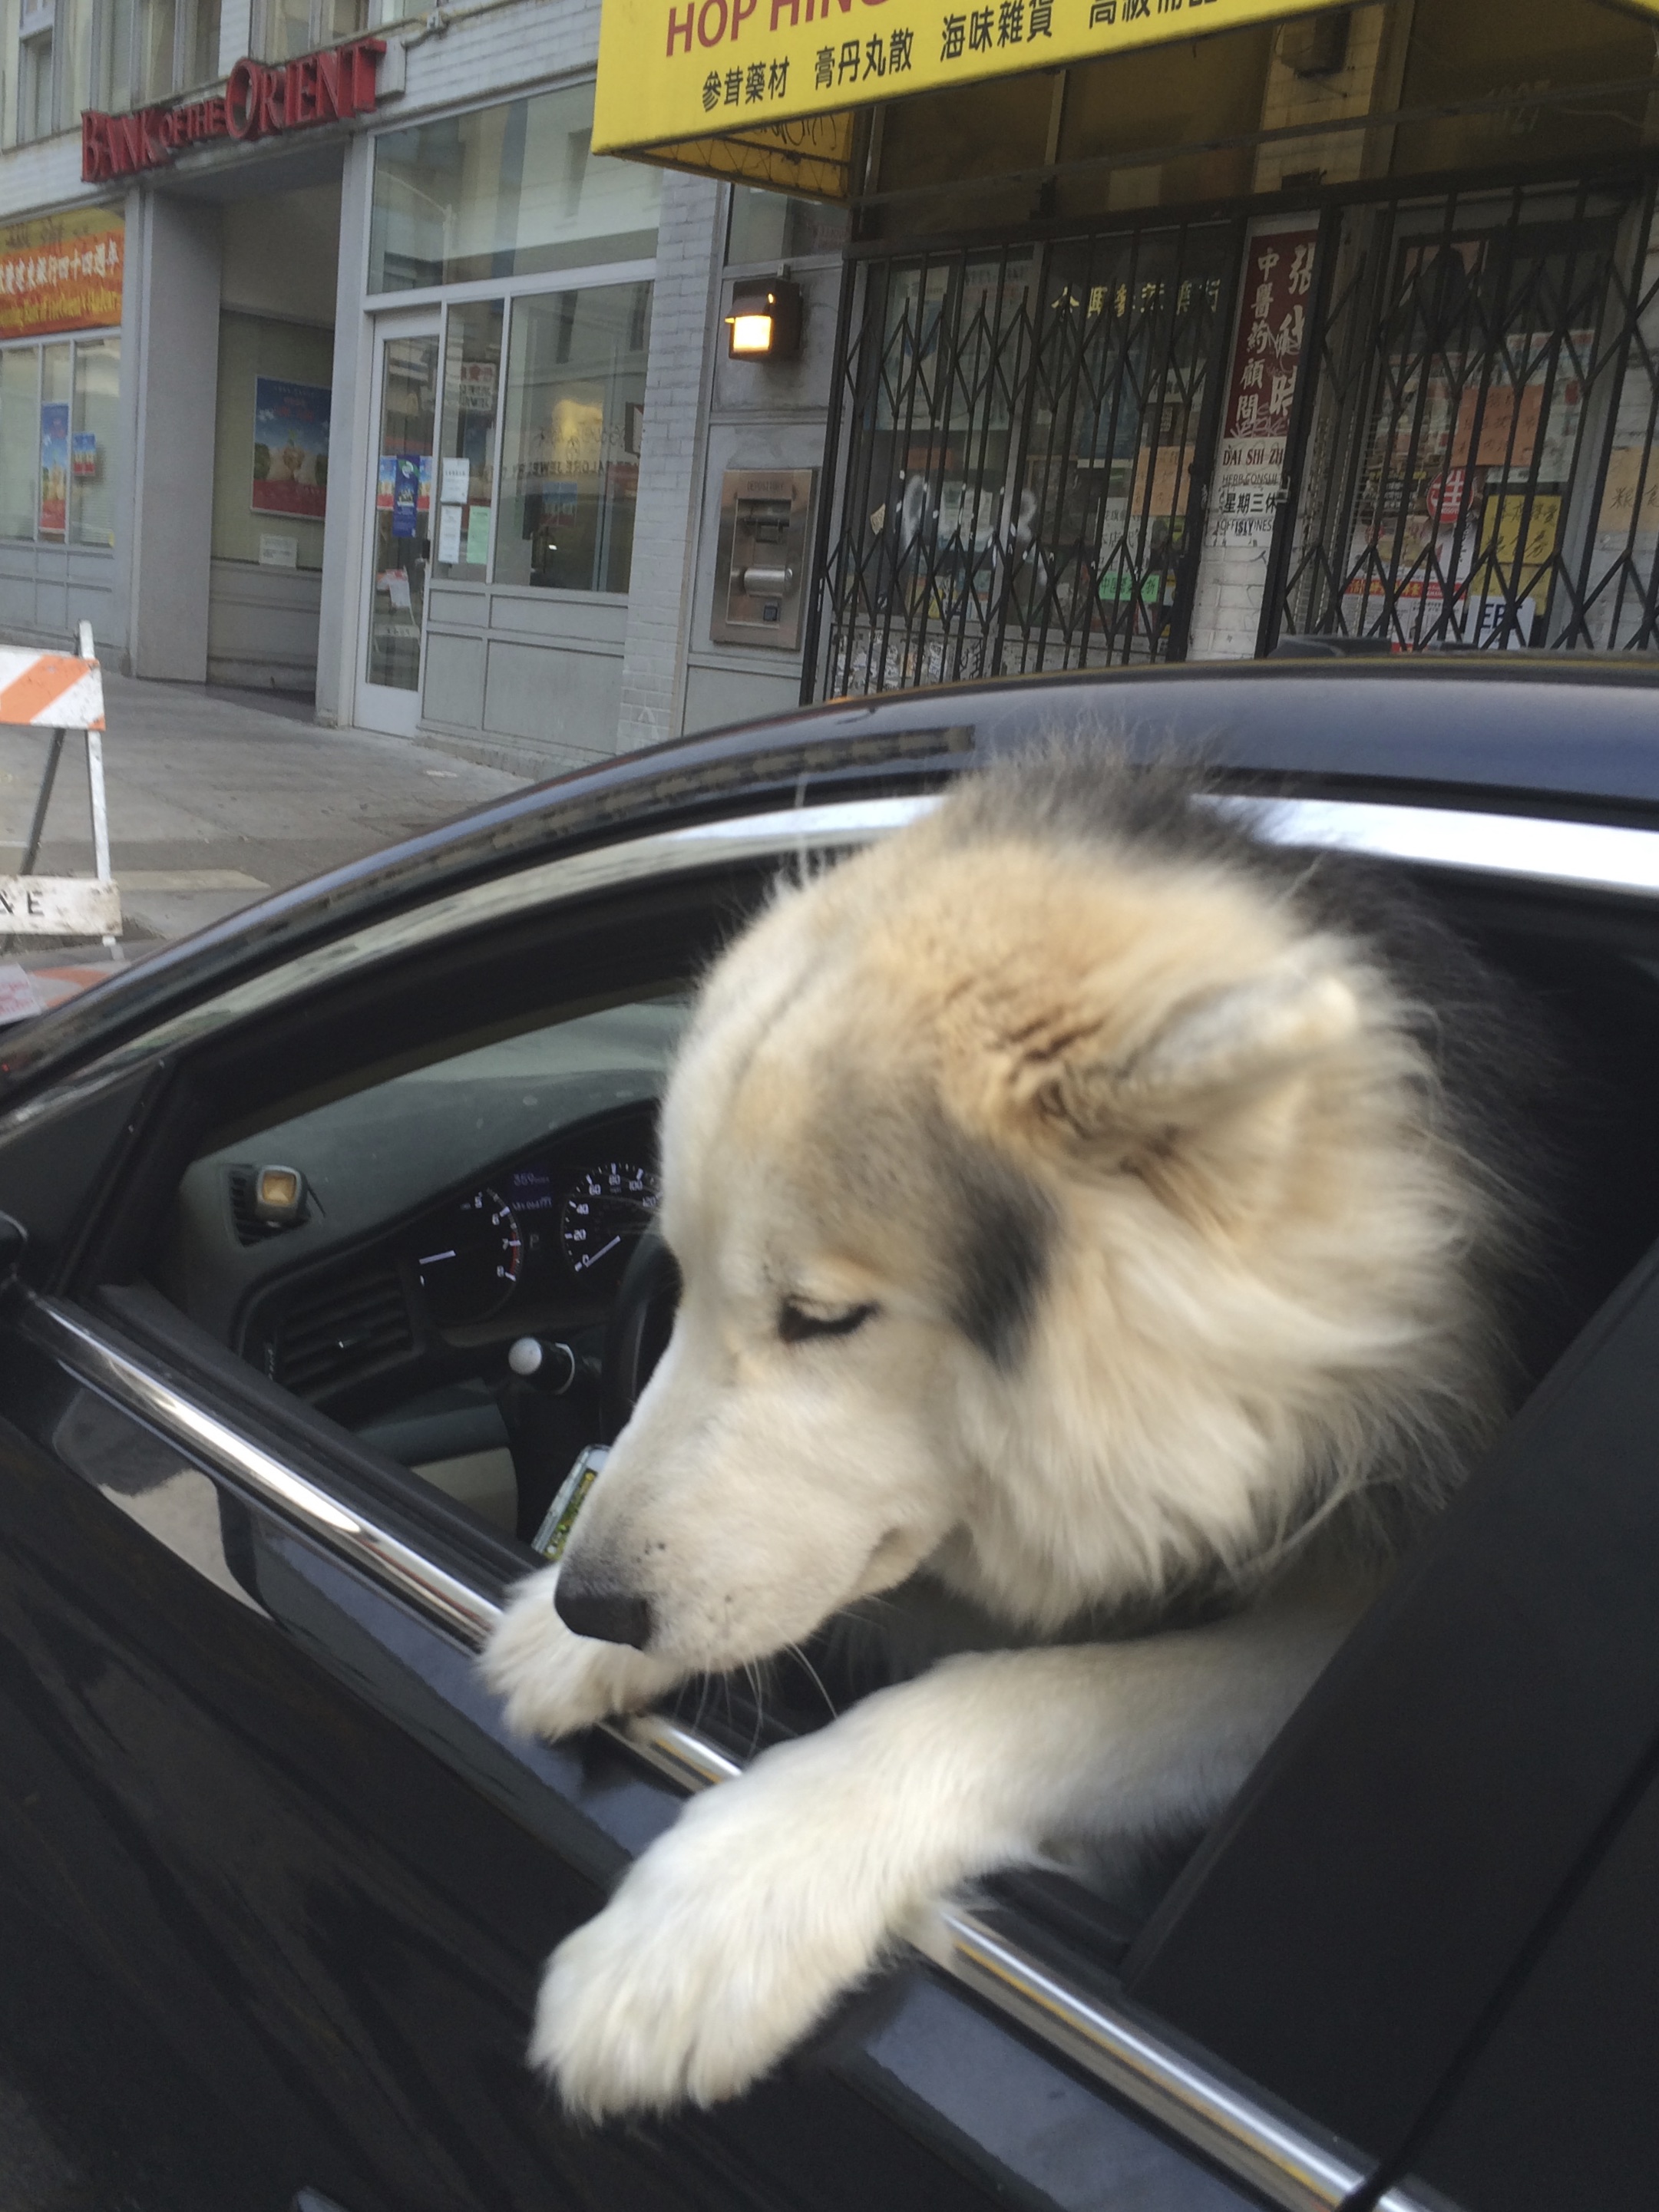 Huge Wooly Malamute Sticking His Head Out Of The Driver's Window Of A Car And Sitting On The Driver